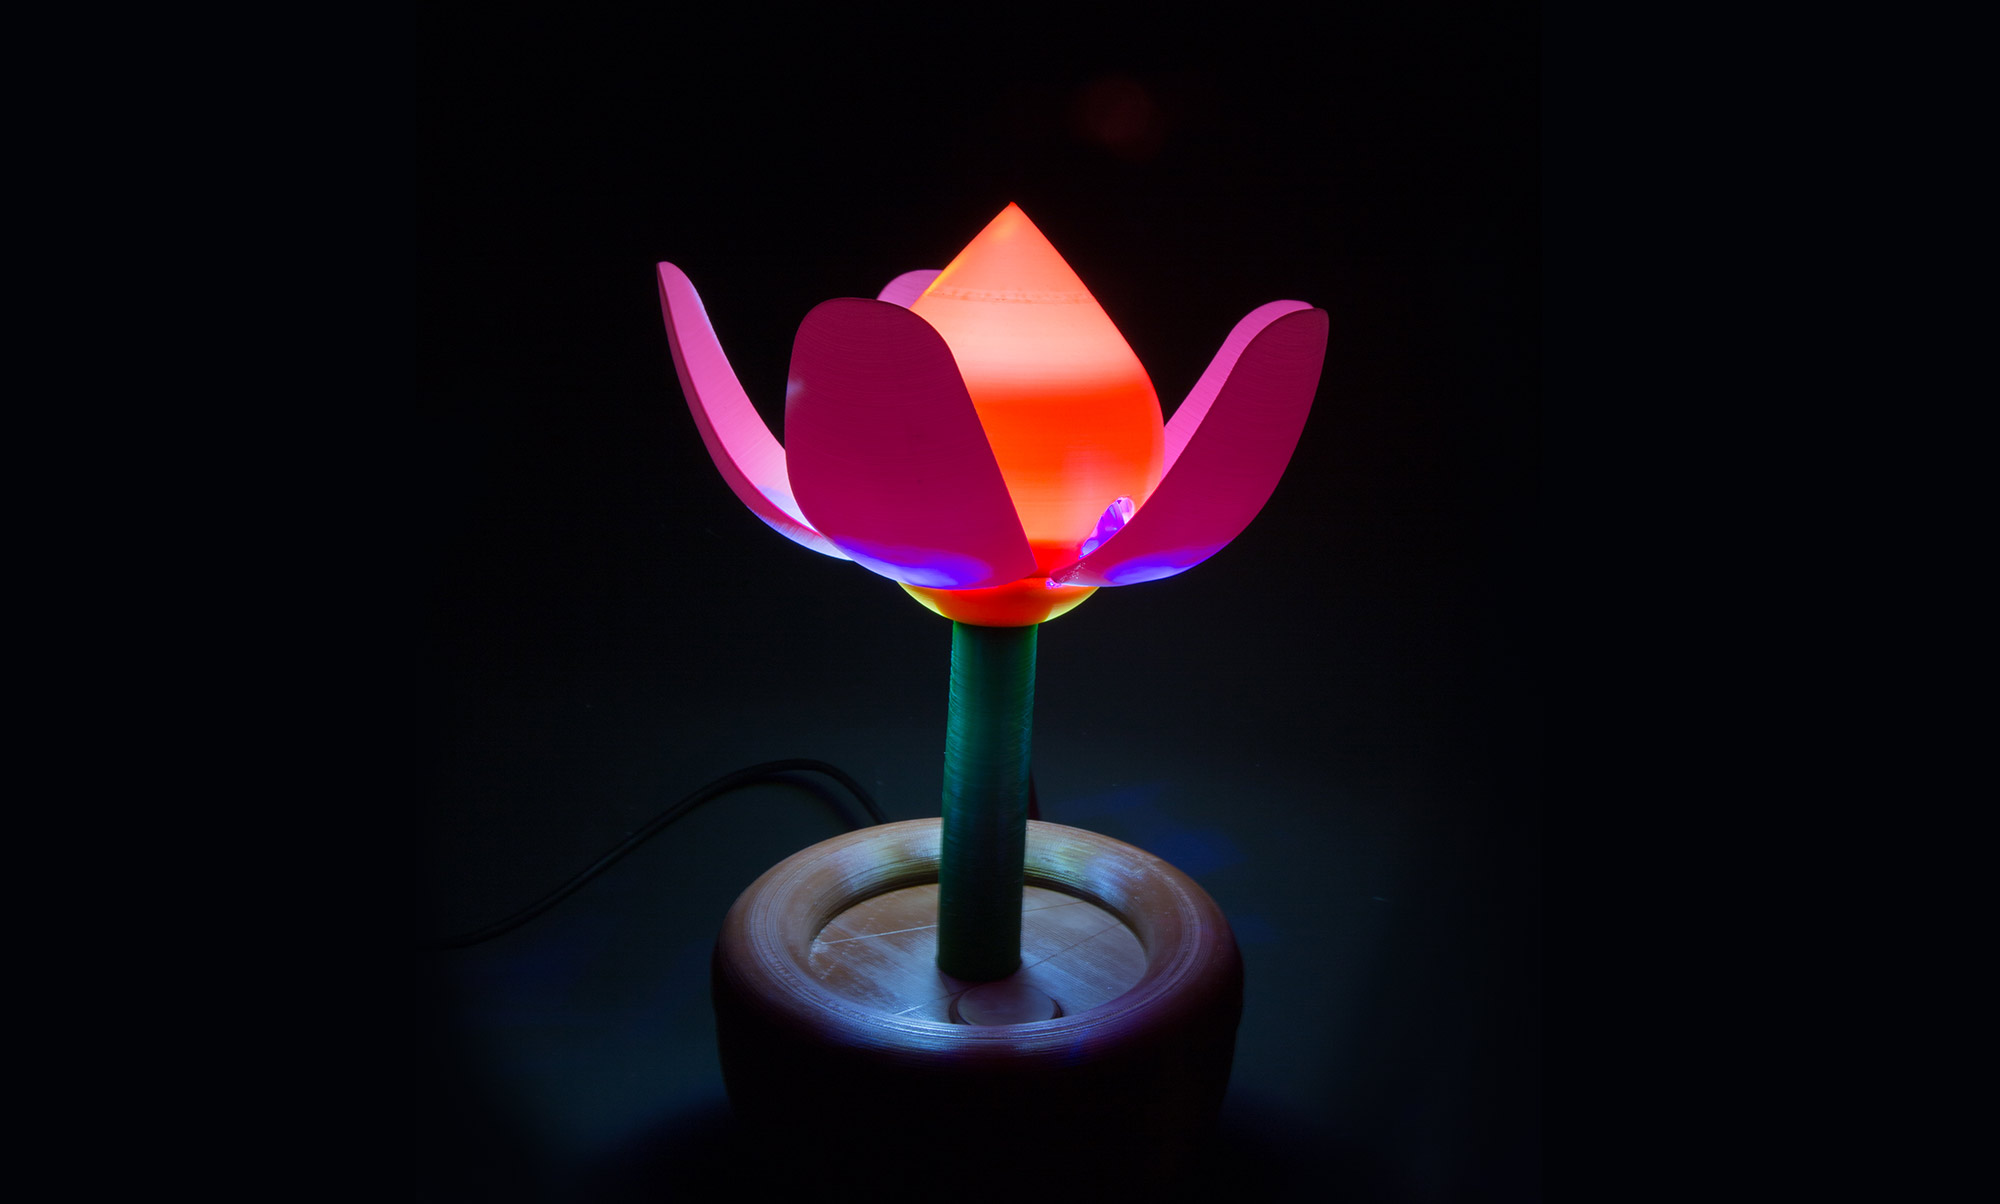 3D Print This Blooming Flower Night Light